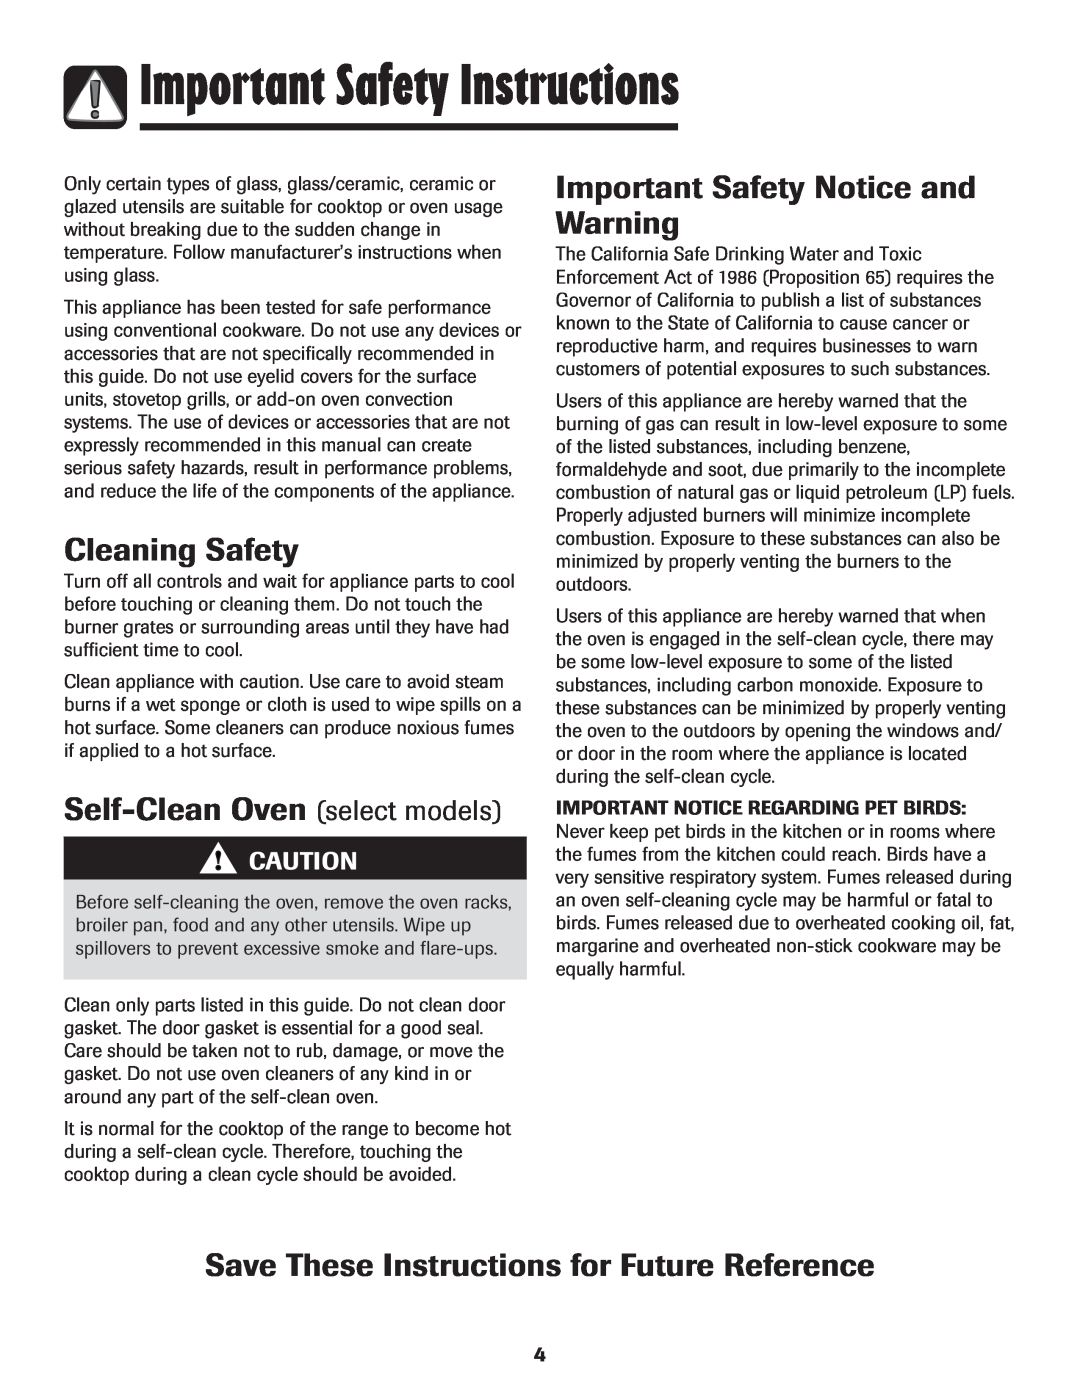 Amana pmn important safety instructions Cleaning Safety, Self-Clean Oven select models, Important Safety Notice and Warning 